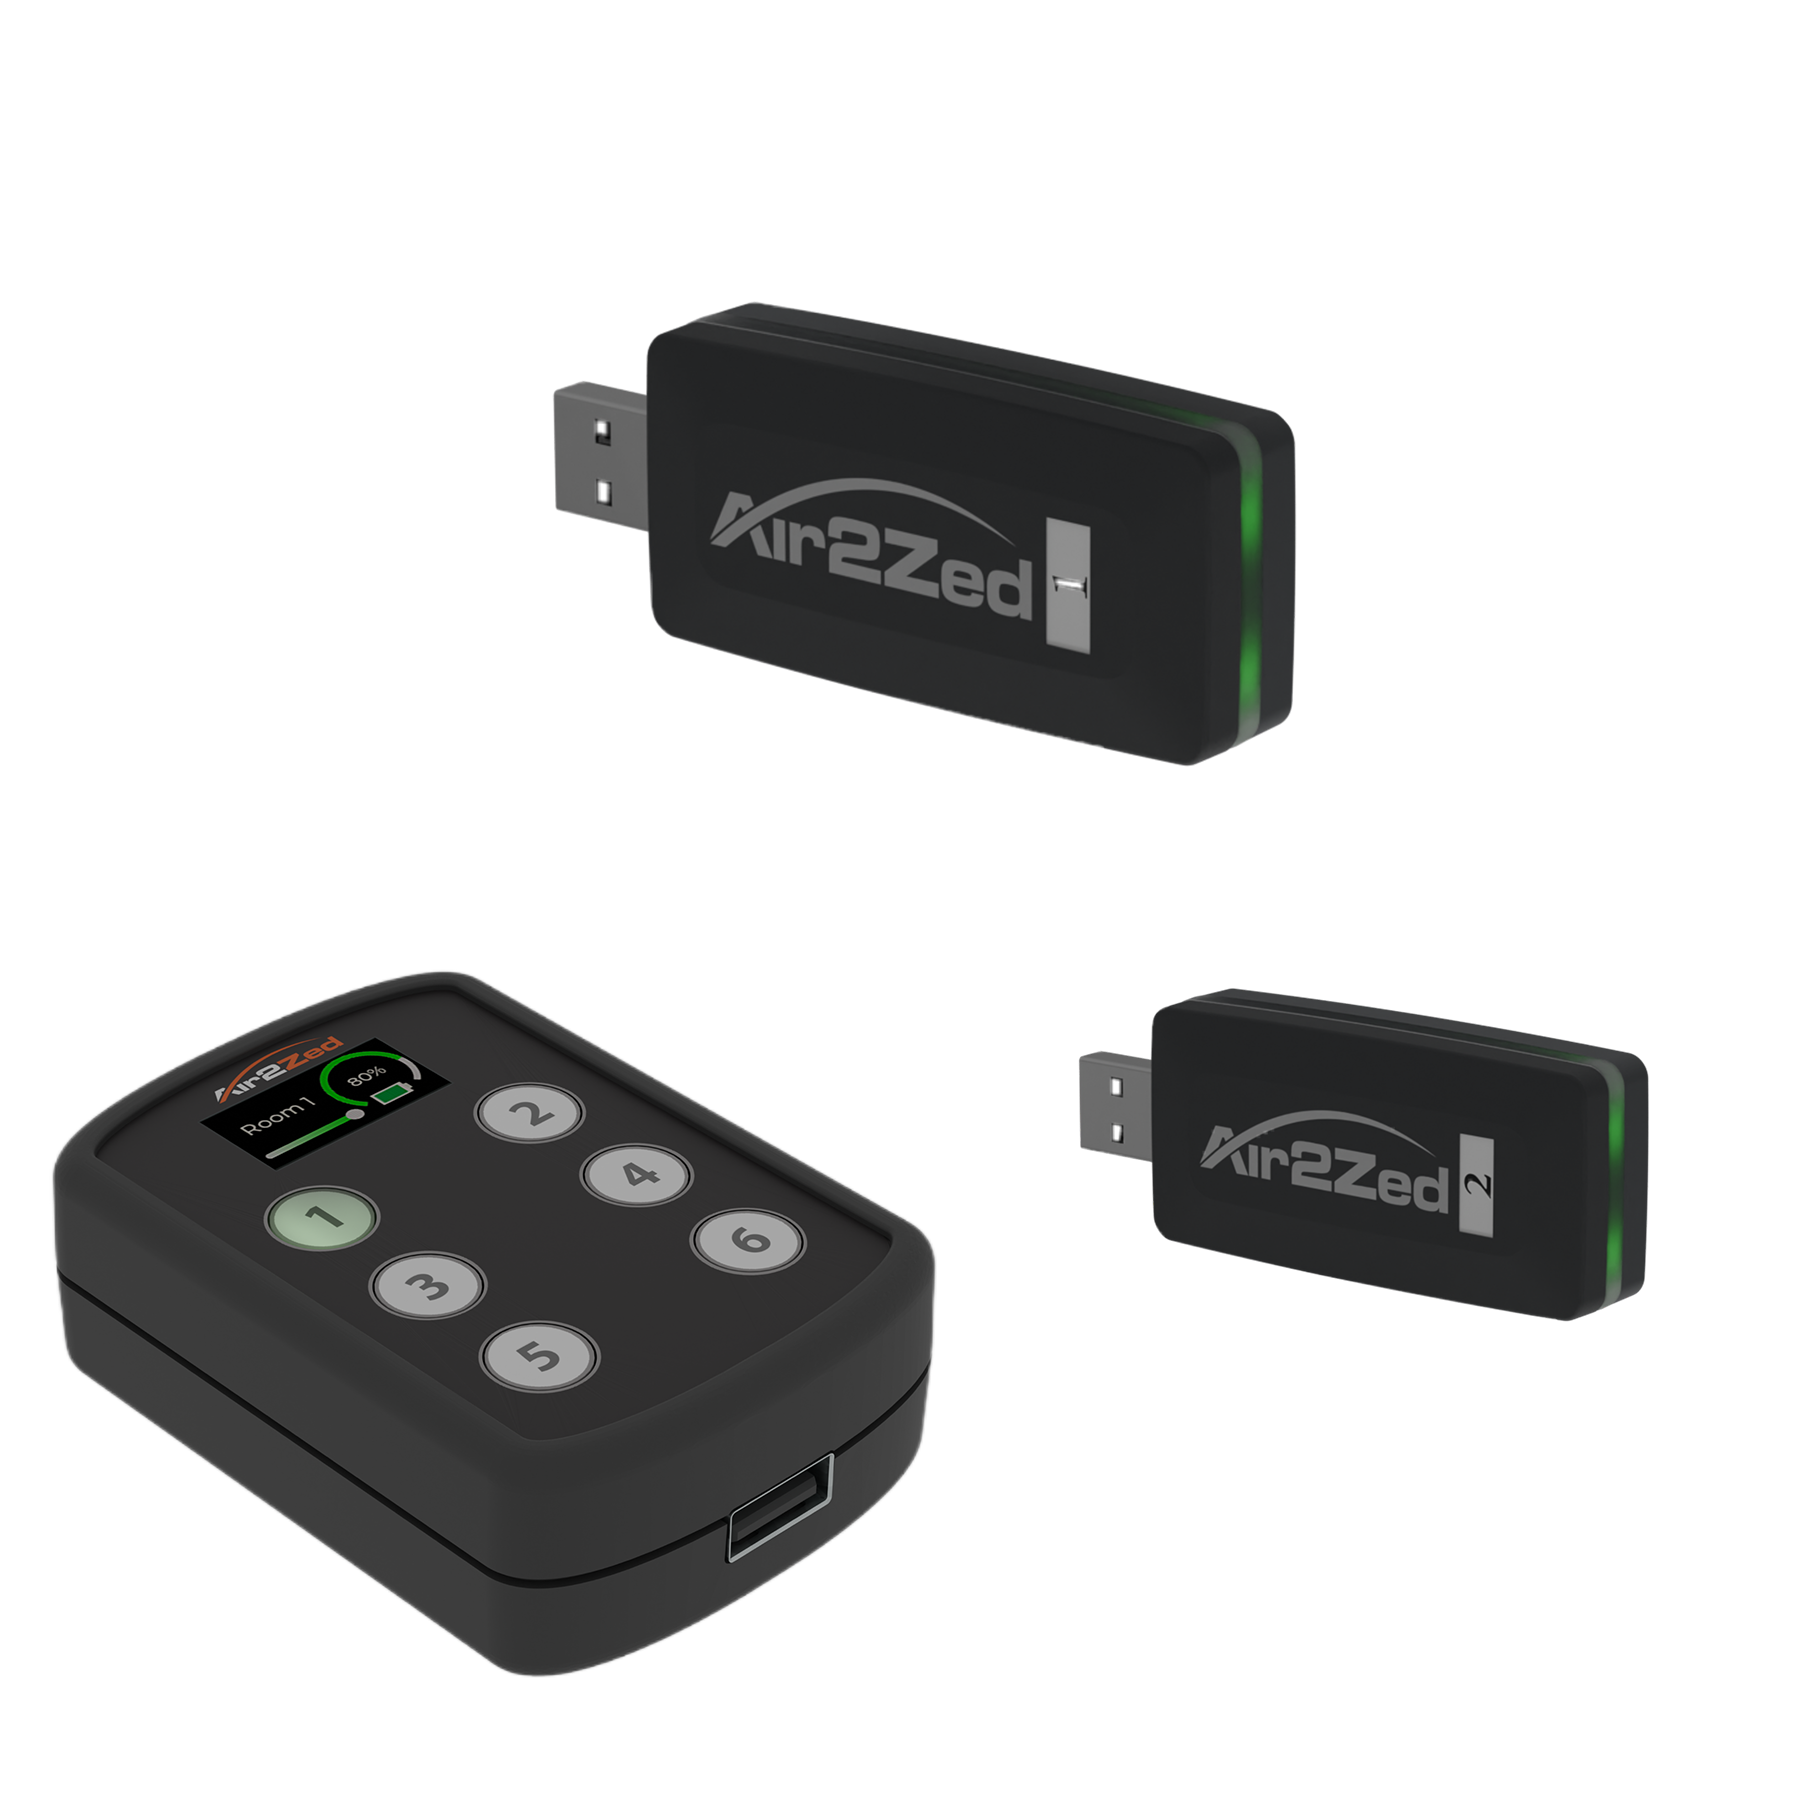 Air2Zed wireless system from A2Z Imaging | Image Credit: © A2Z Imaging